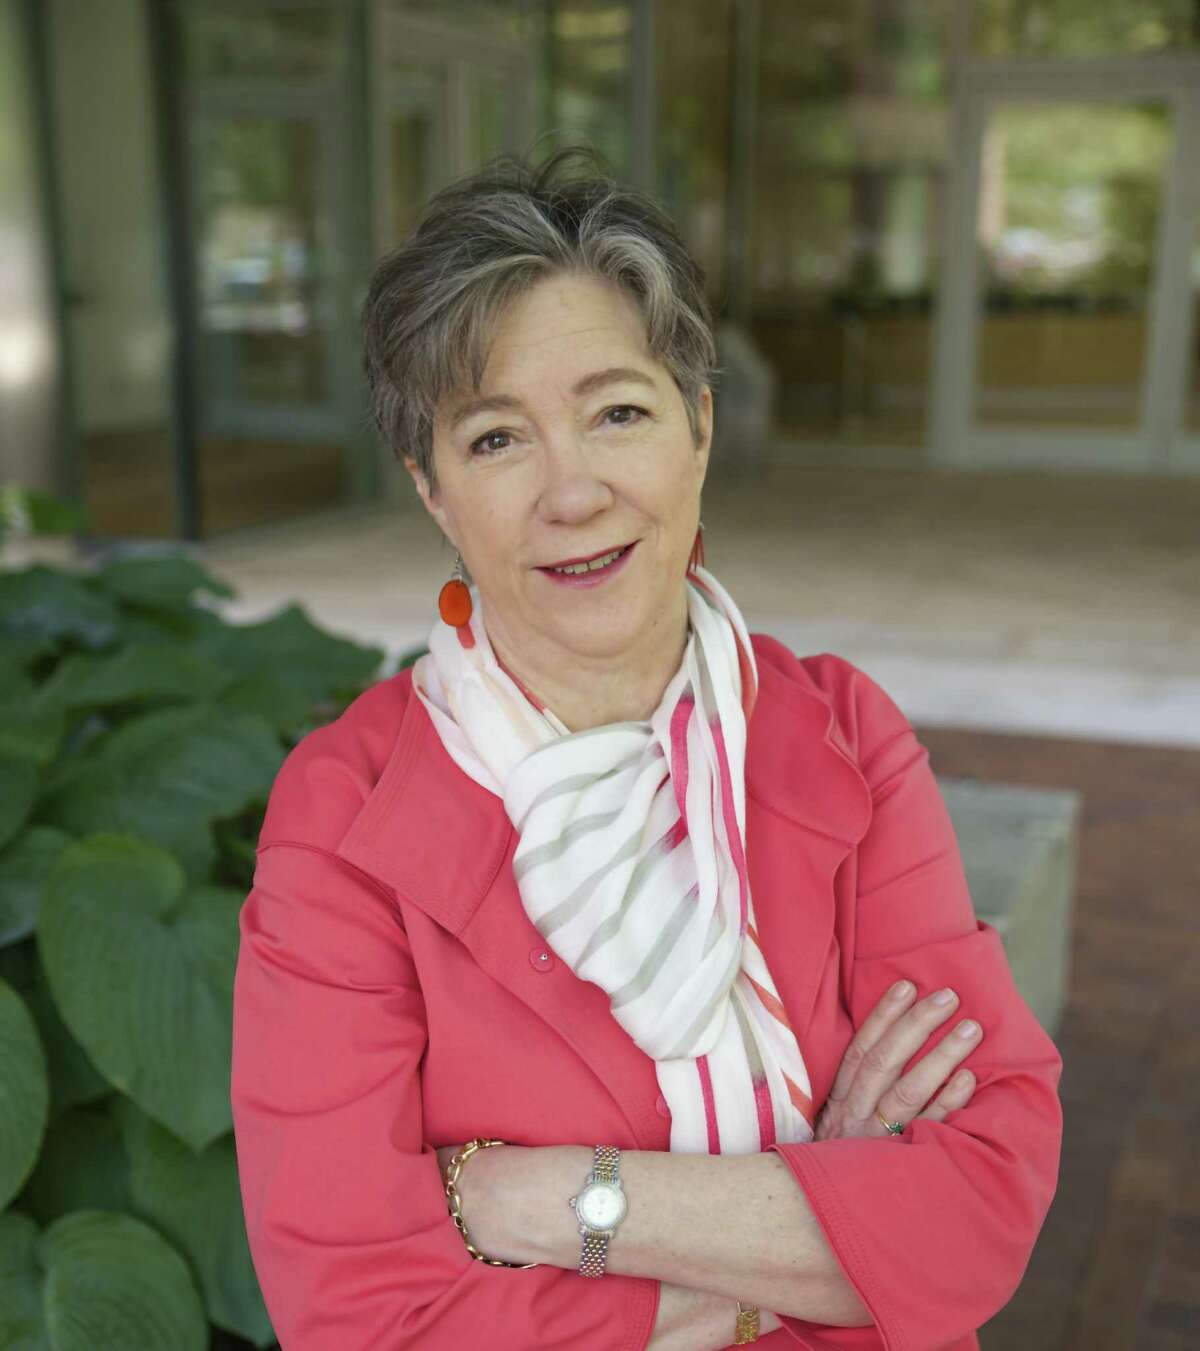 Susan Lee Lindquist, Ph.D., professor of Biology, Massachusetts Institute of Technology and member of MIT's Whitehead Institute for Biological Research, Cambridge, Mass., is one of the winners of the Albany Medical Center Prize for 2016. (Provided photo)